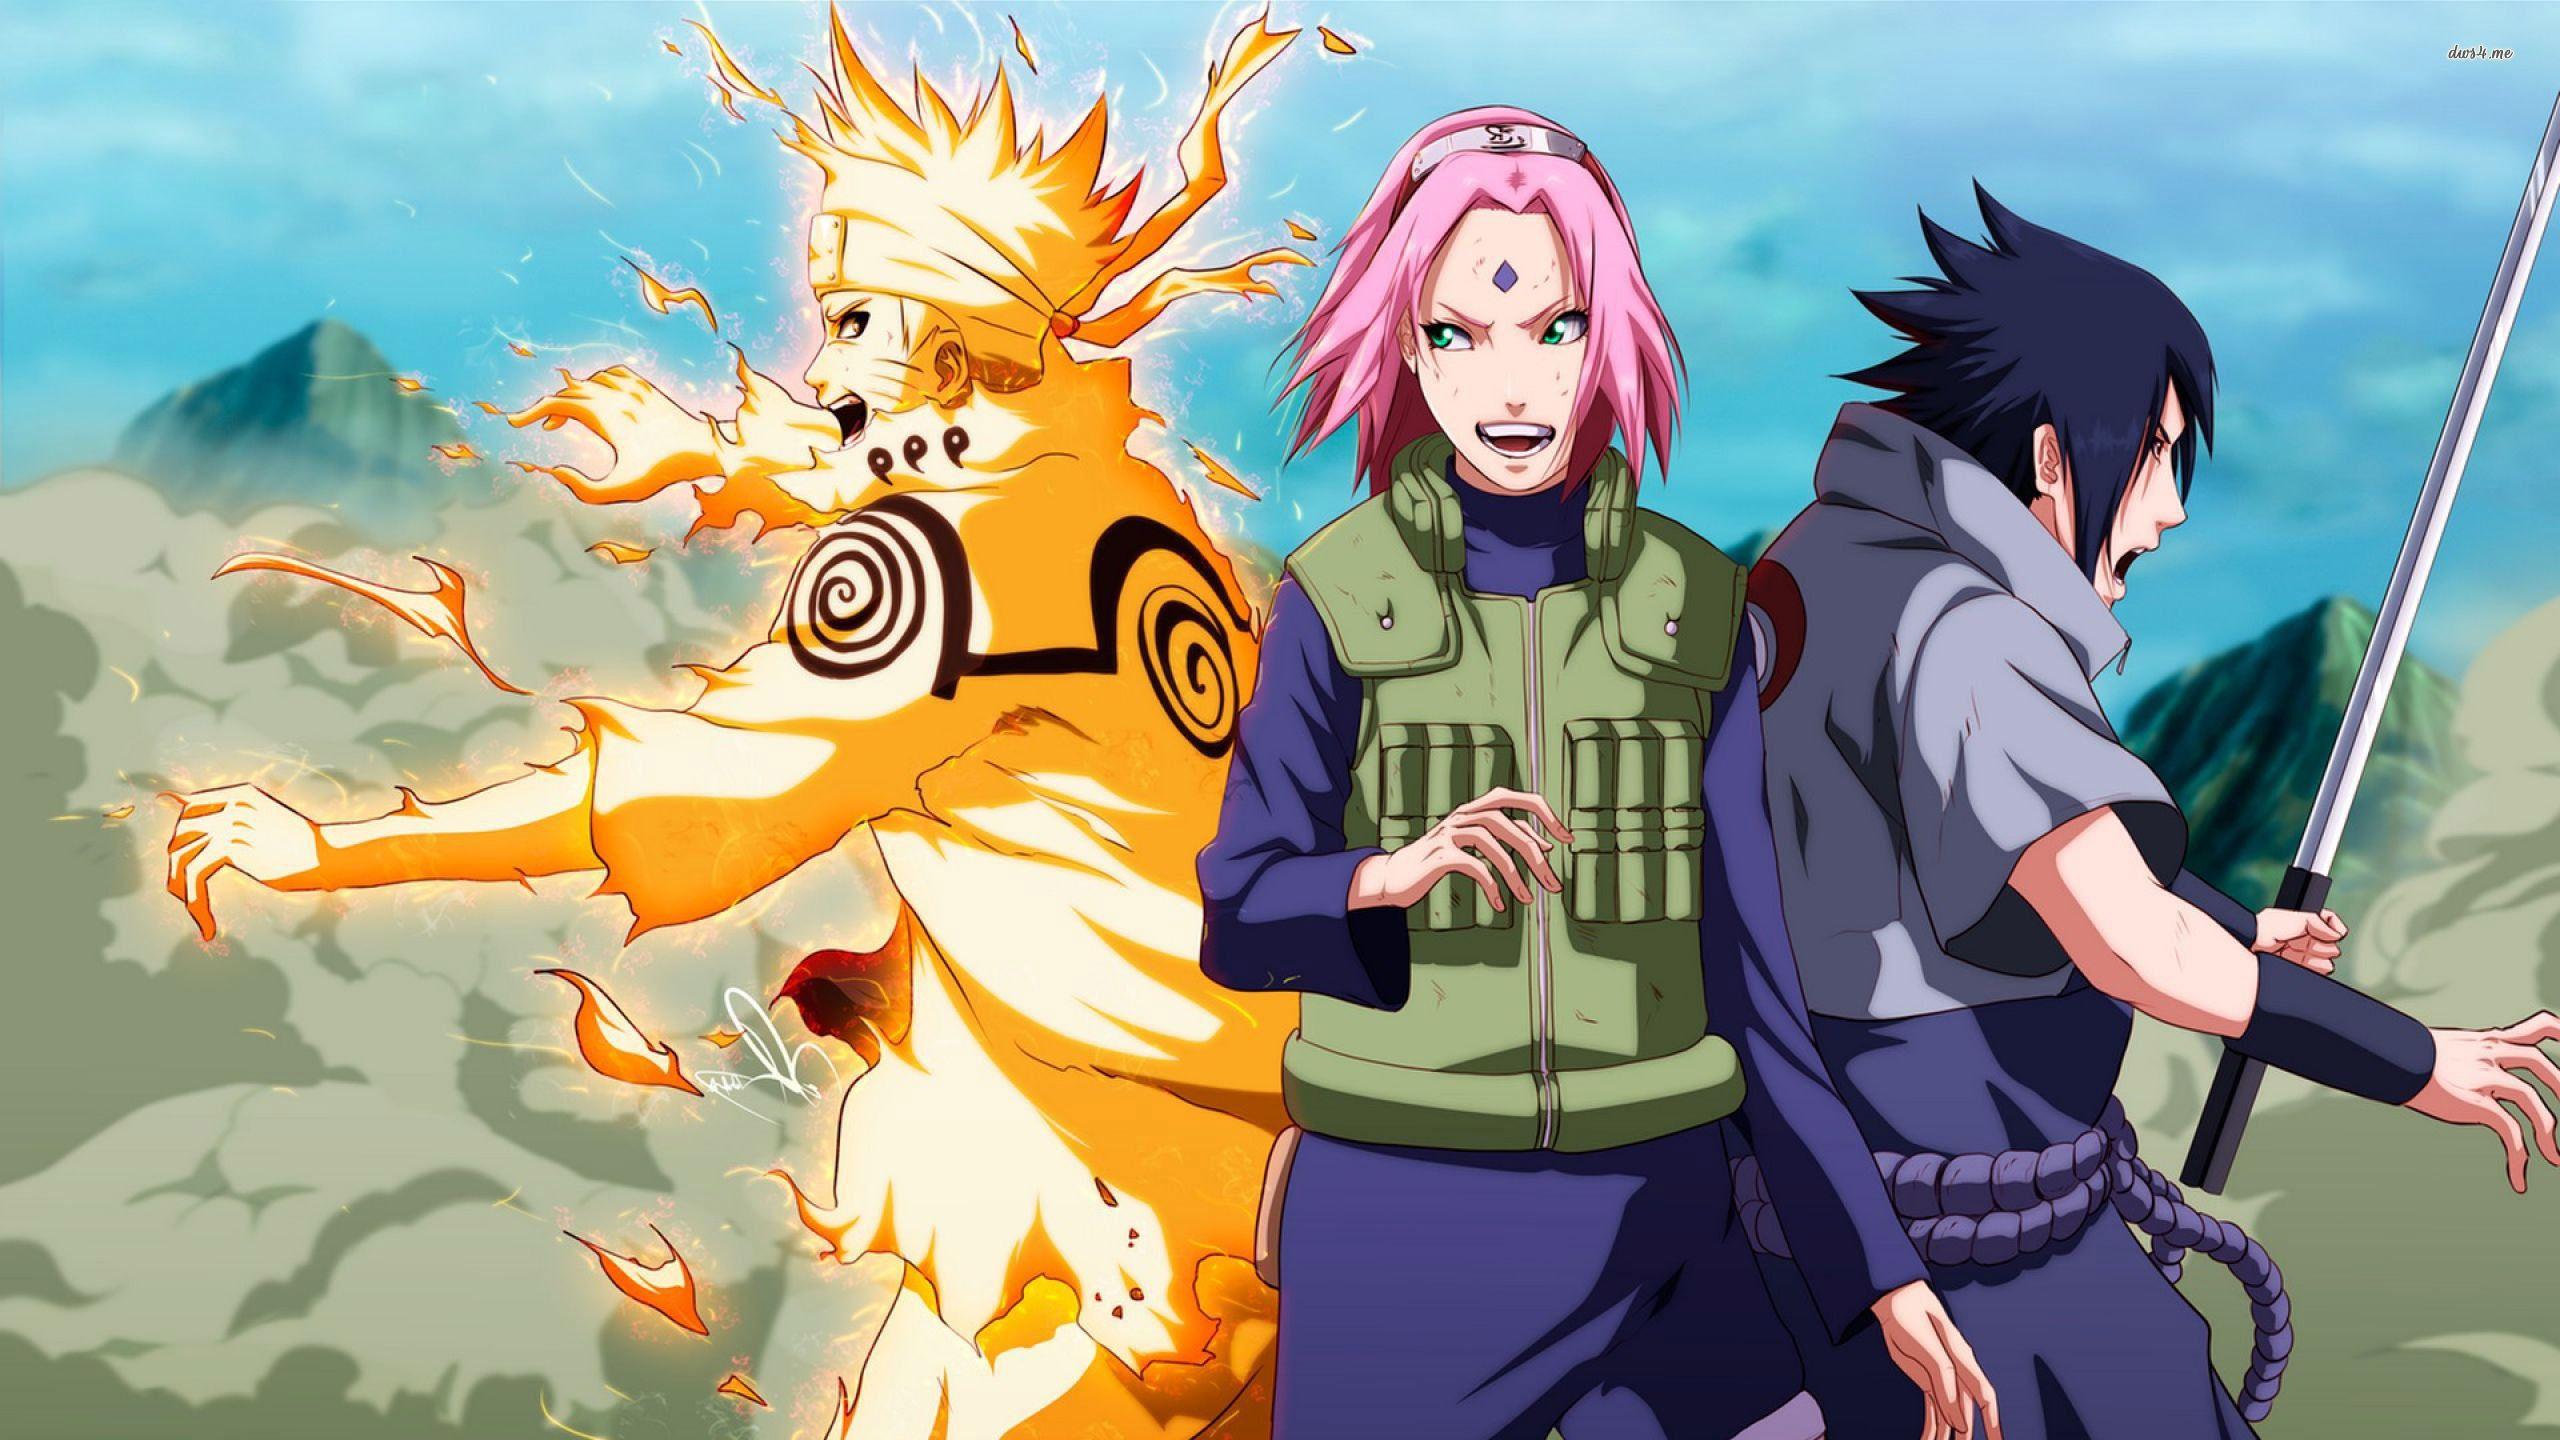 Naruto Shippuden Wallpaper Group with items HD Wallpaper. Anime